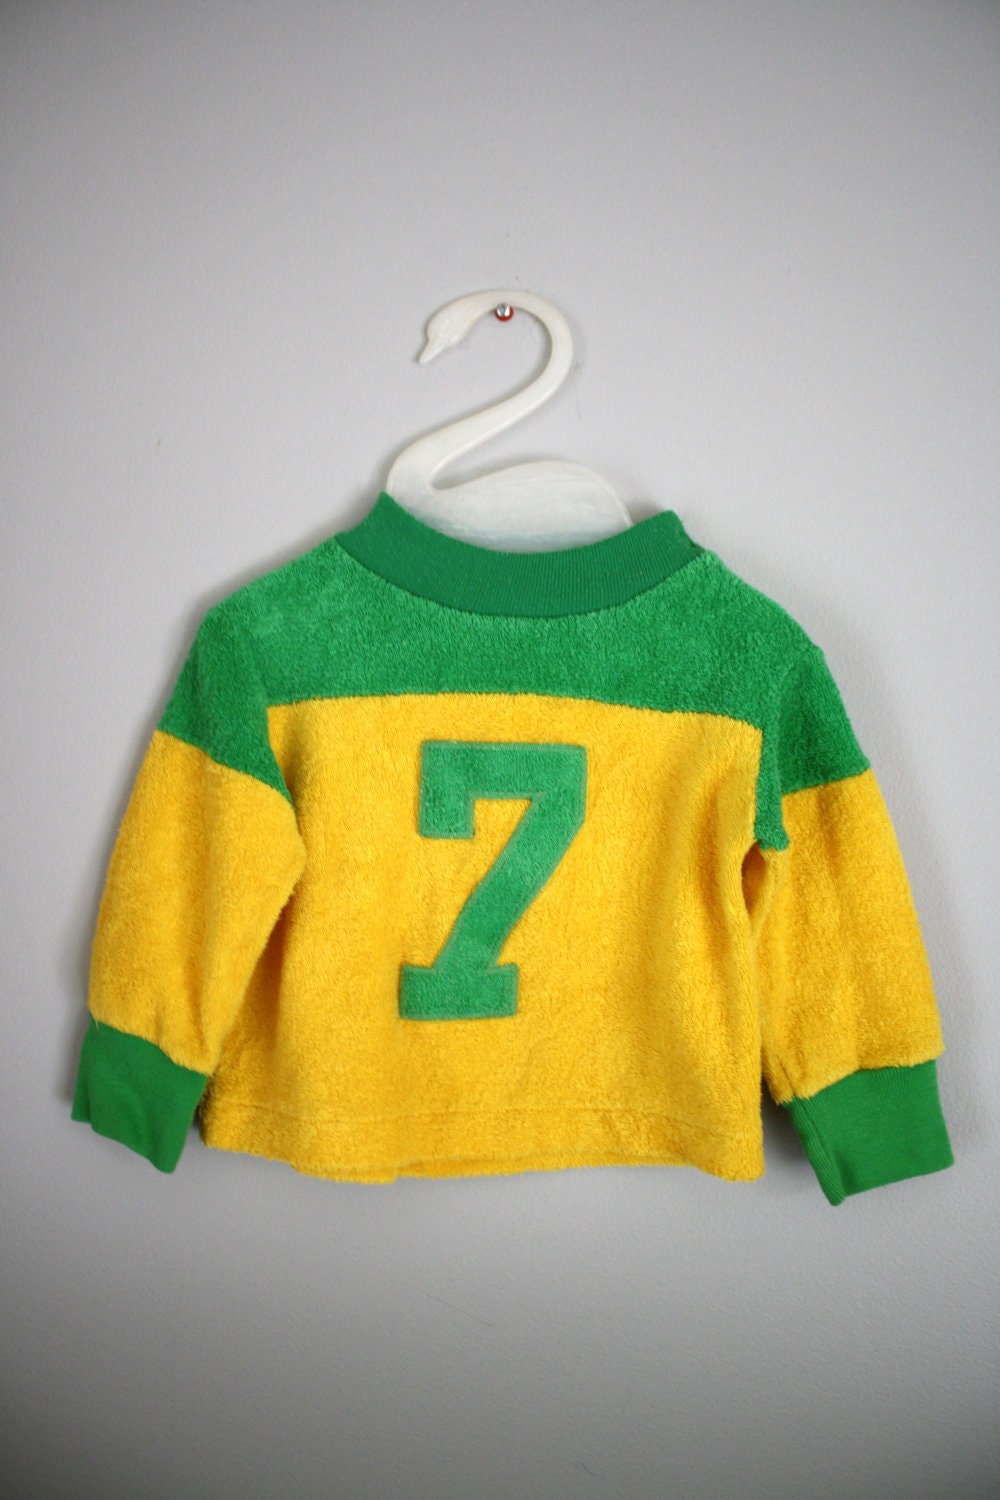 70s 80s 2 Piece Outfit Sweater and Pants Set 9-12 months - babyshapes